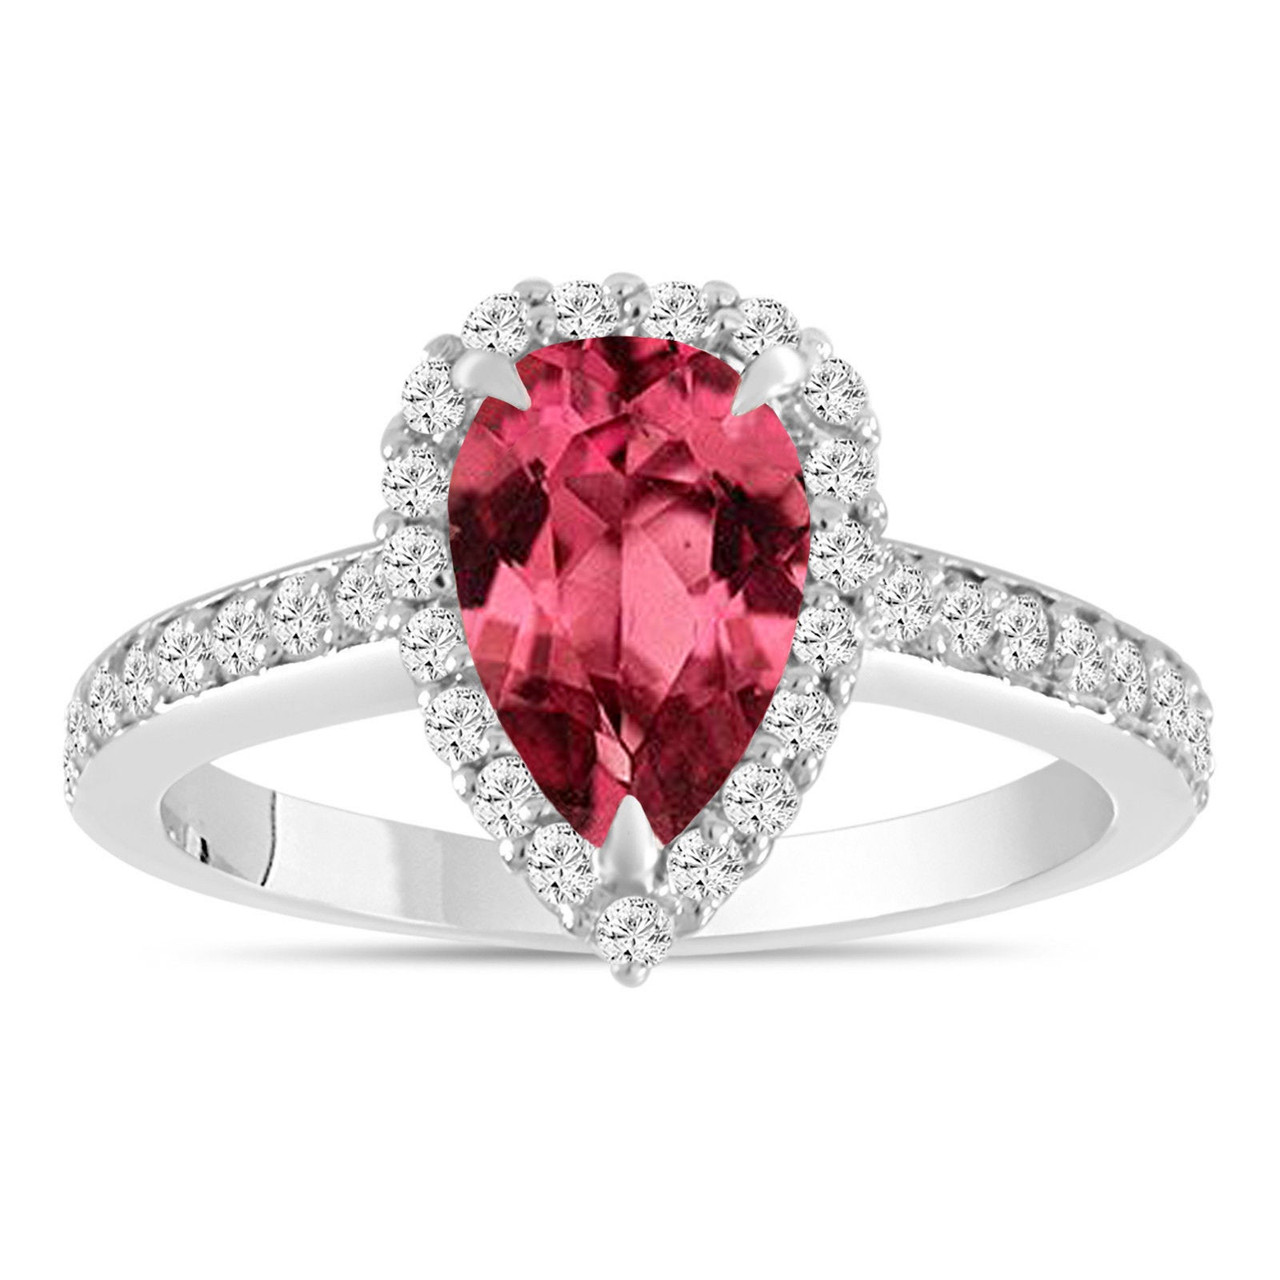 1.66 CTW Pear Shape Pink Tourmaline and Diamond Ring in 14K White Gold